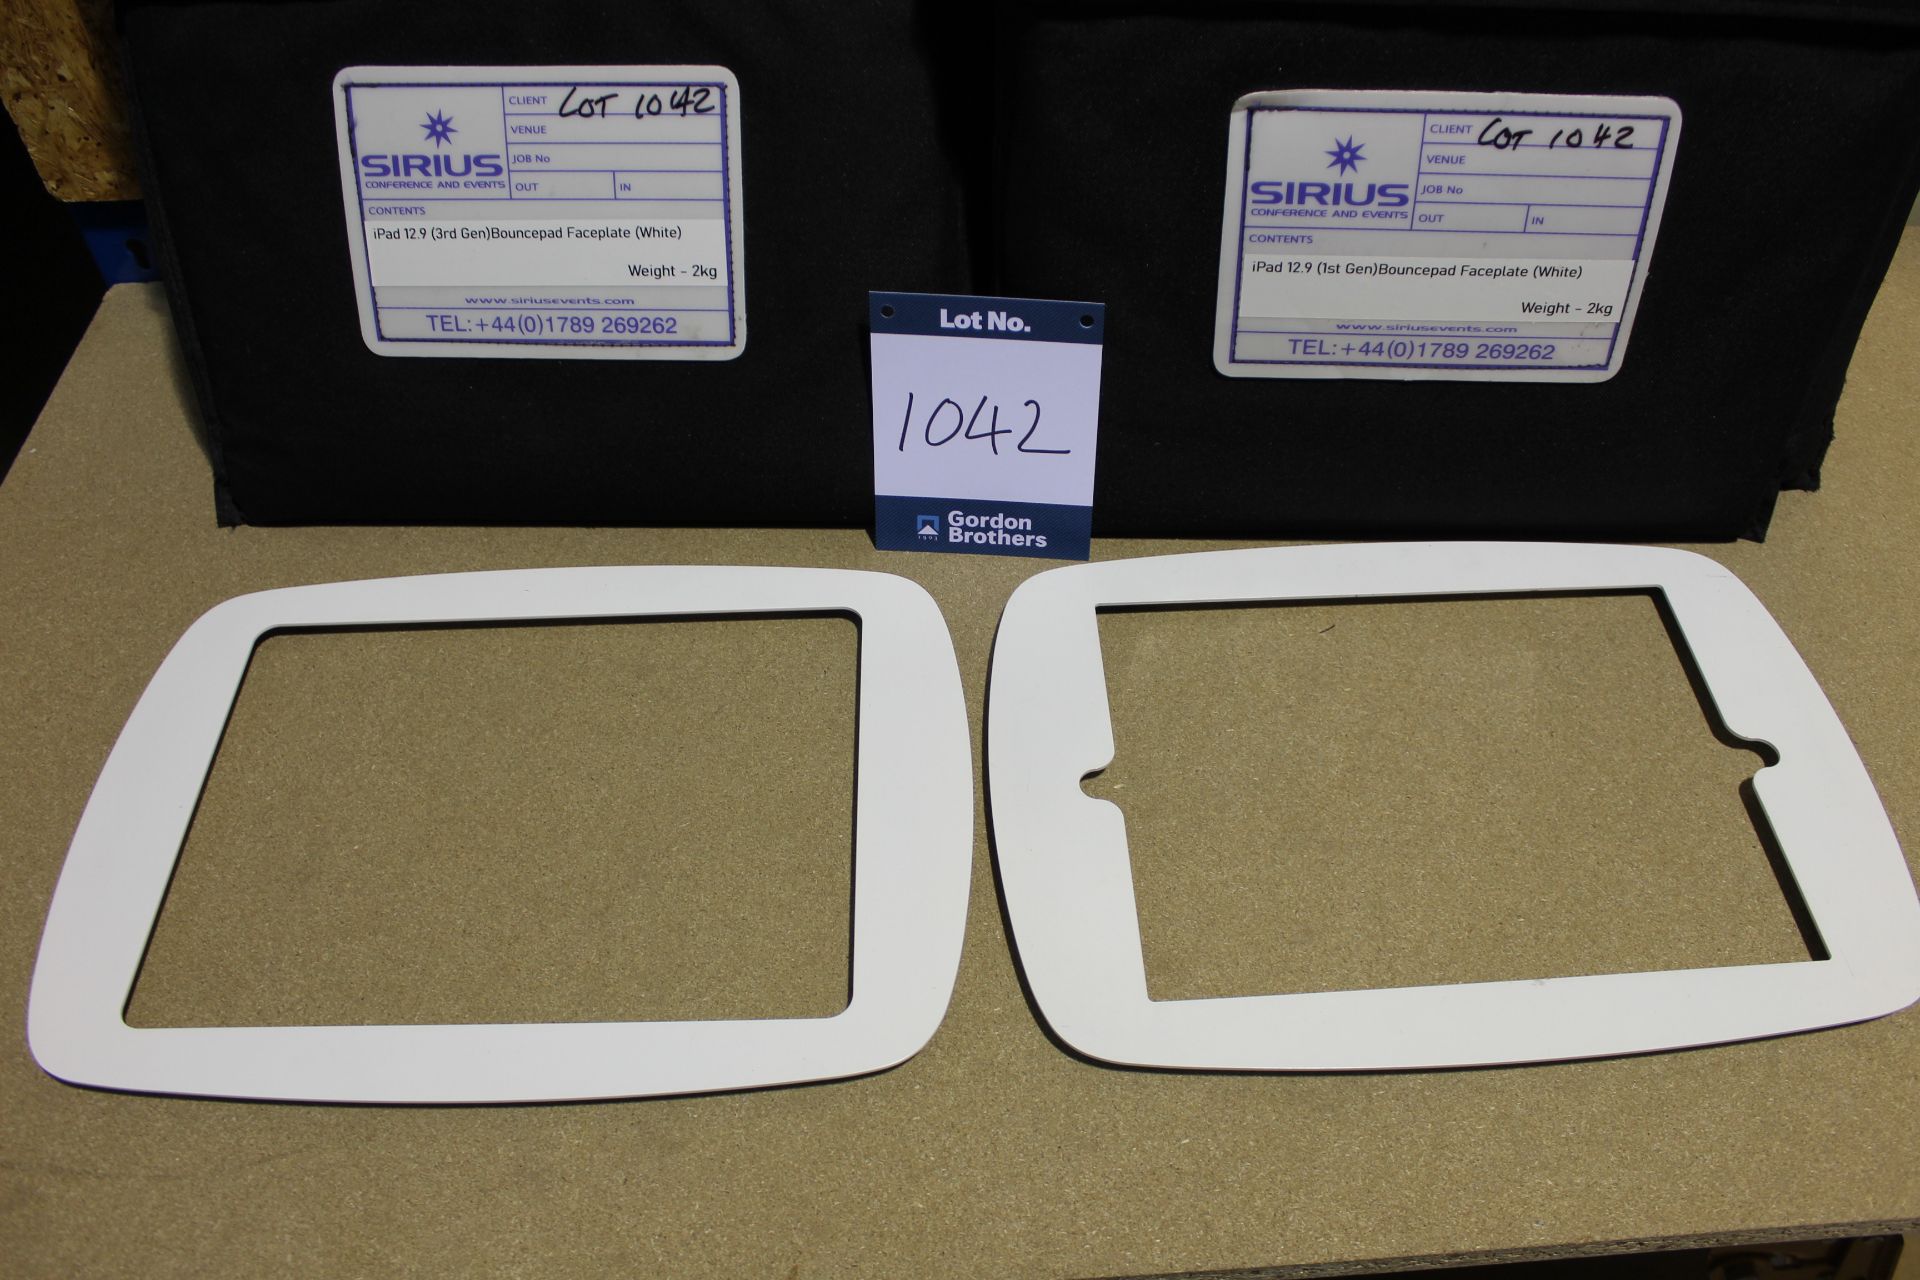 Bouncepad iPad 12.9" components comprising 6x faceplates iPad 12.9" (1st Gen) (White), 3x faceplates - Image 2 of 8